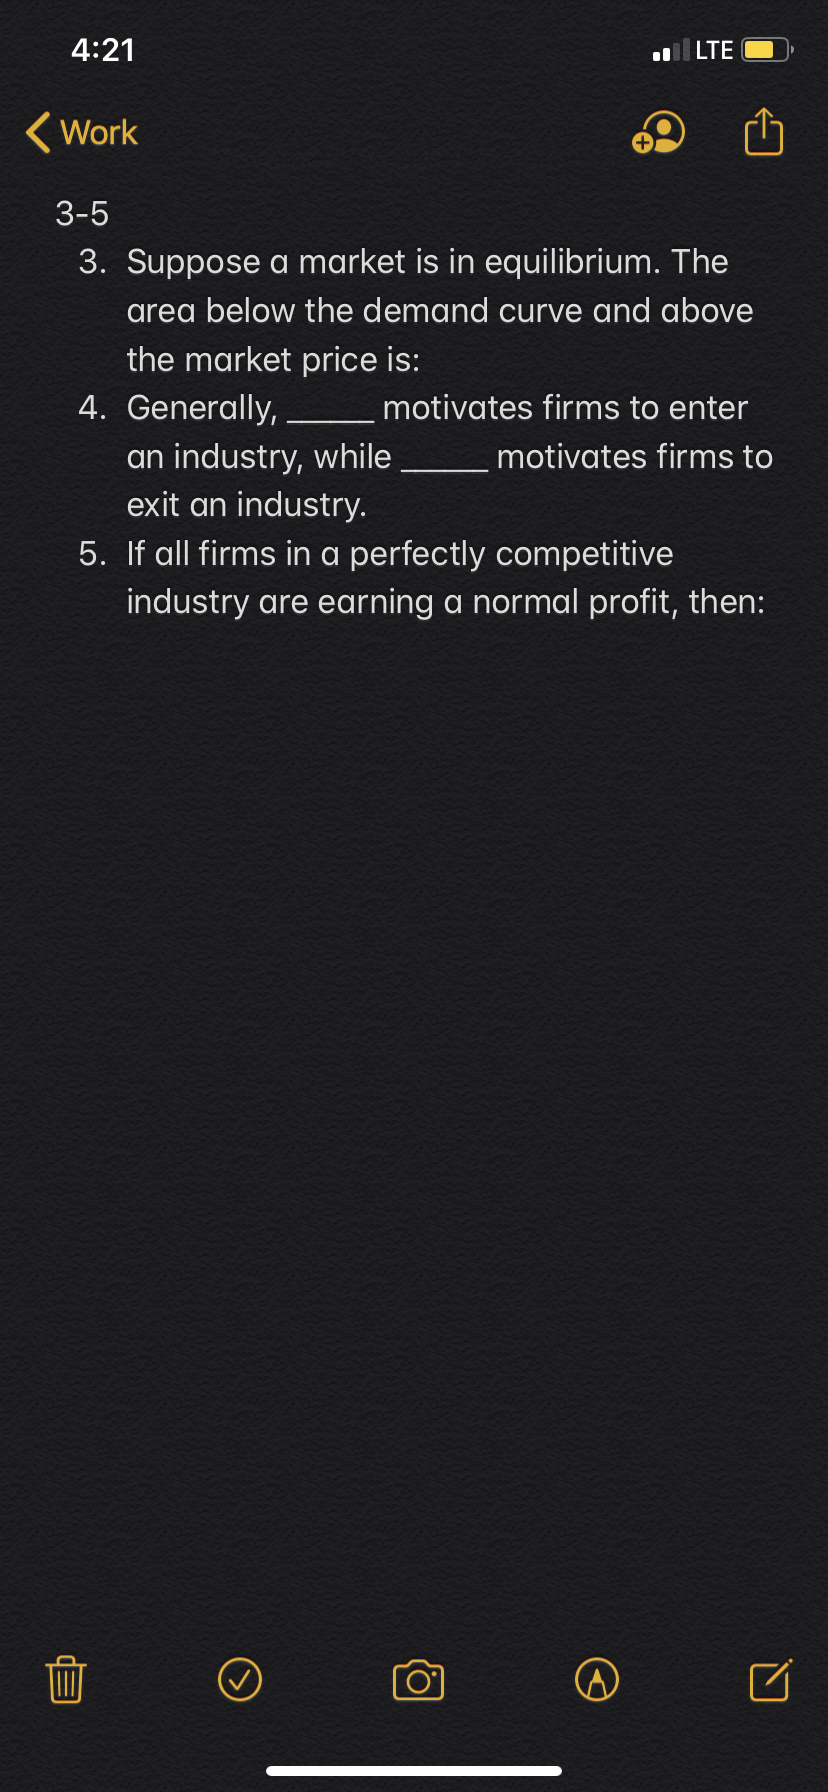 4:21
lLTE
Work
3-5
3. Suppose a market is in equilibrium. The
area below the demand curve and above
the market price is:
4. Generally,
motivates firms to enter
an industry, while
exit an industry.
motivates firms to
5. If all firms in a perfectly competitive
industry are earning a normal profit, then:
